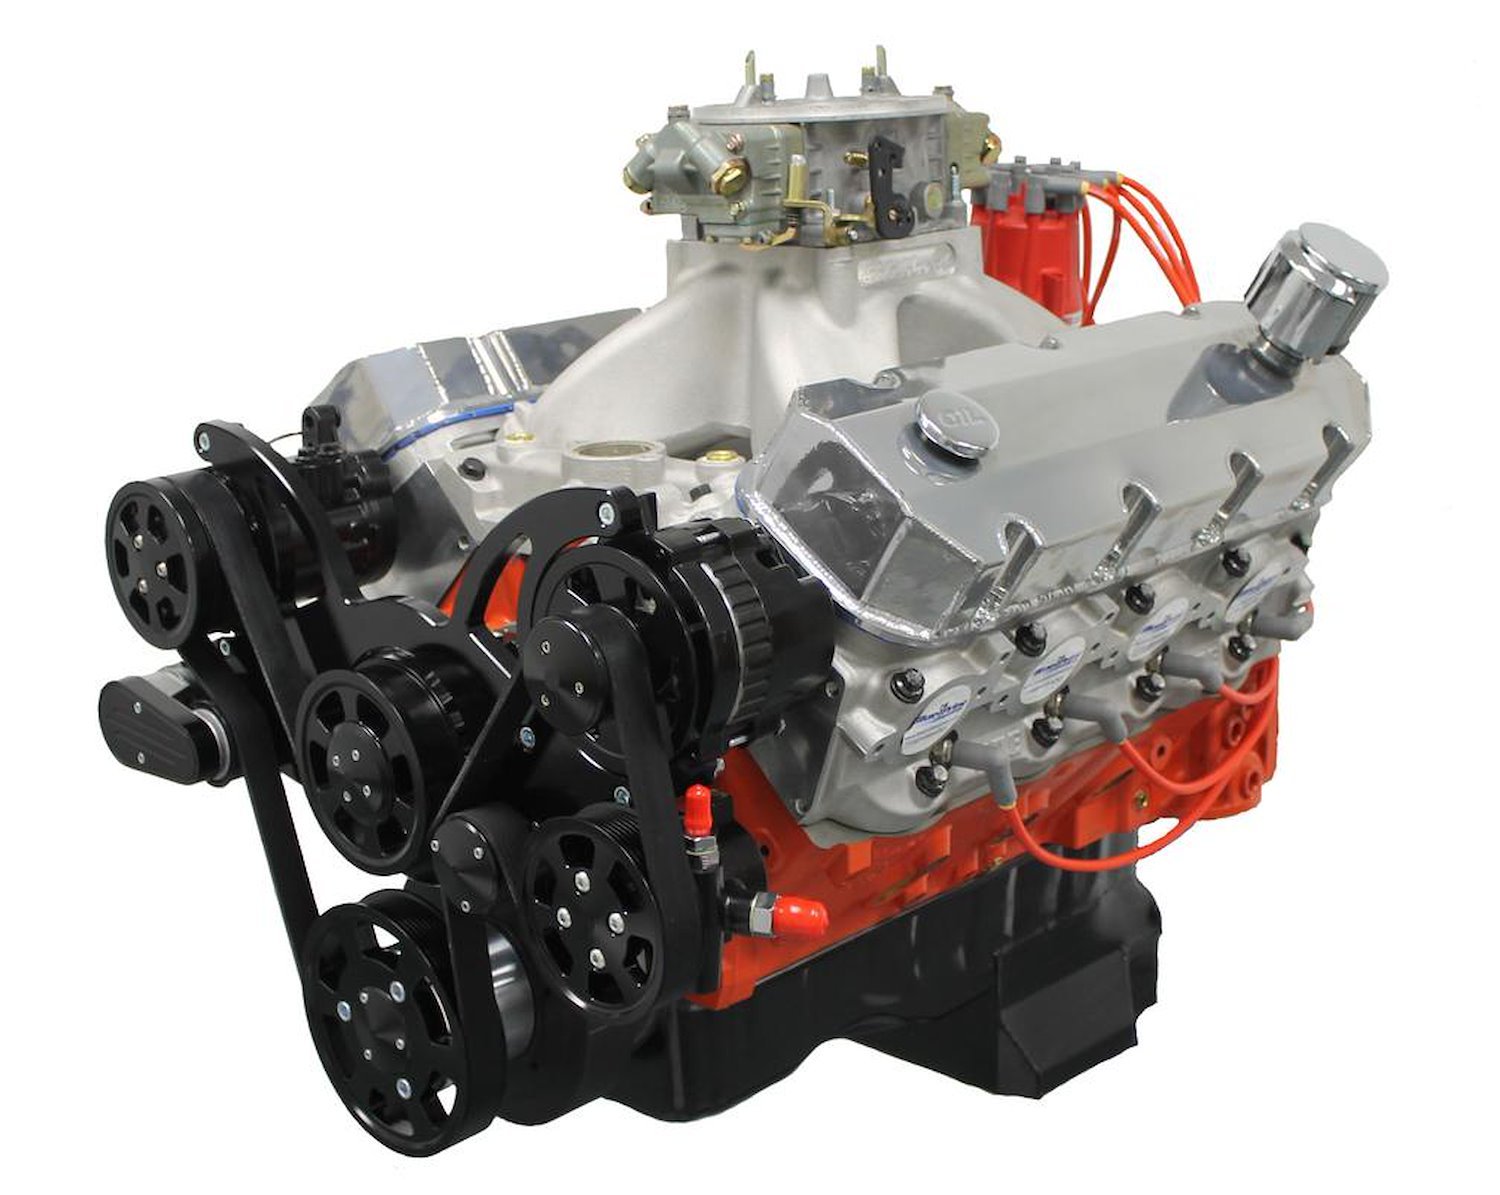 Pro Series Big Block Chevy 598 ci Drop-In Ready Crate Engine [724 HP | 680 ft.-lbs. of TQ]